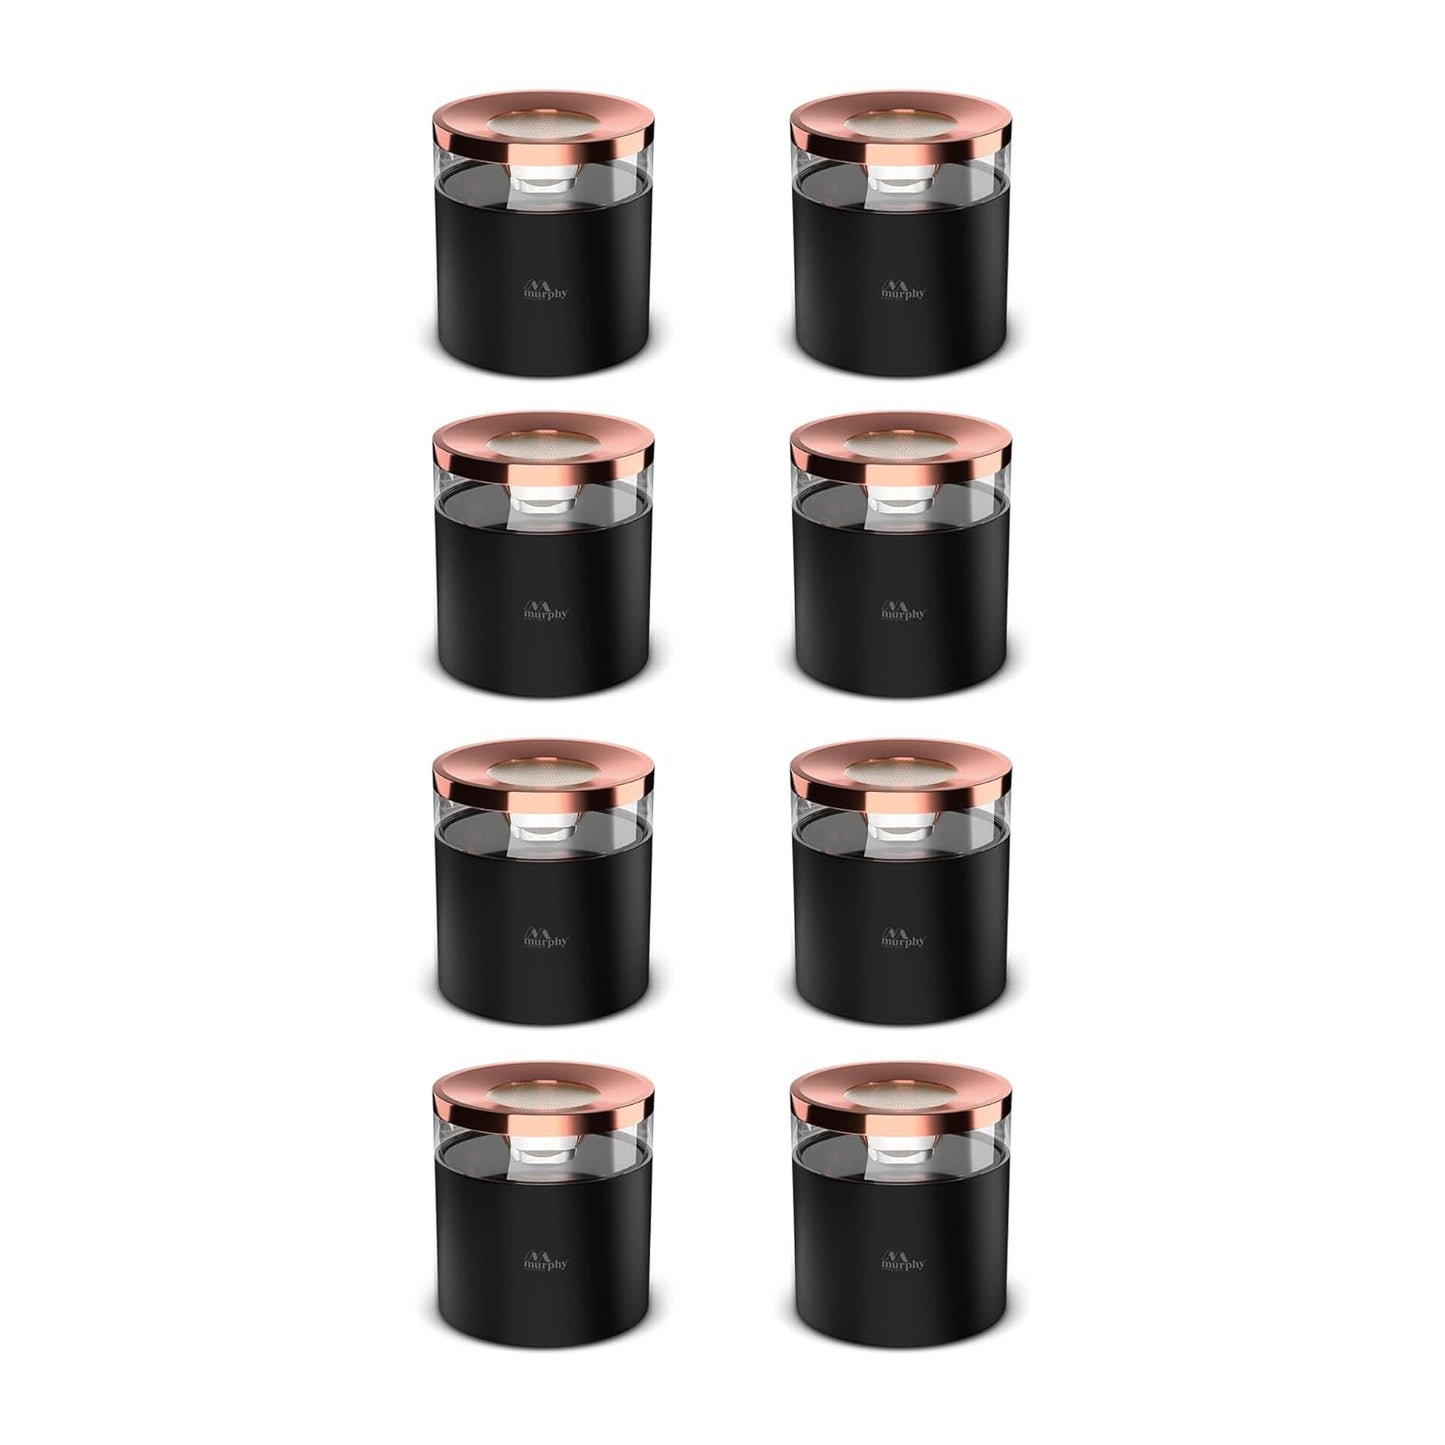 Murphy 6W Crystal Black Rose Gold Cylindrical COB Surface Light